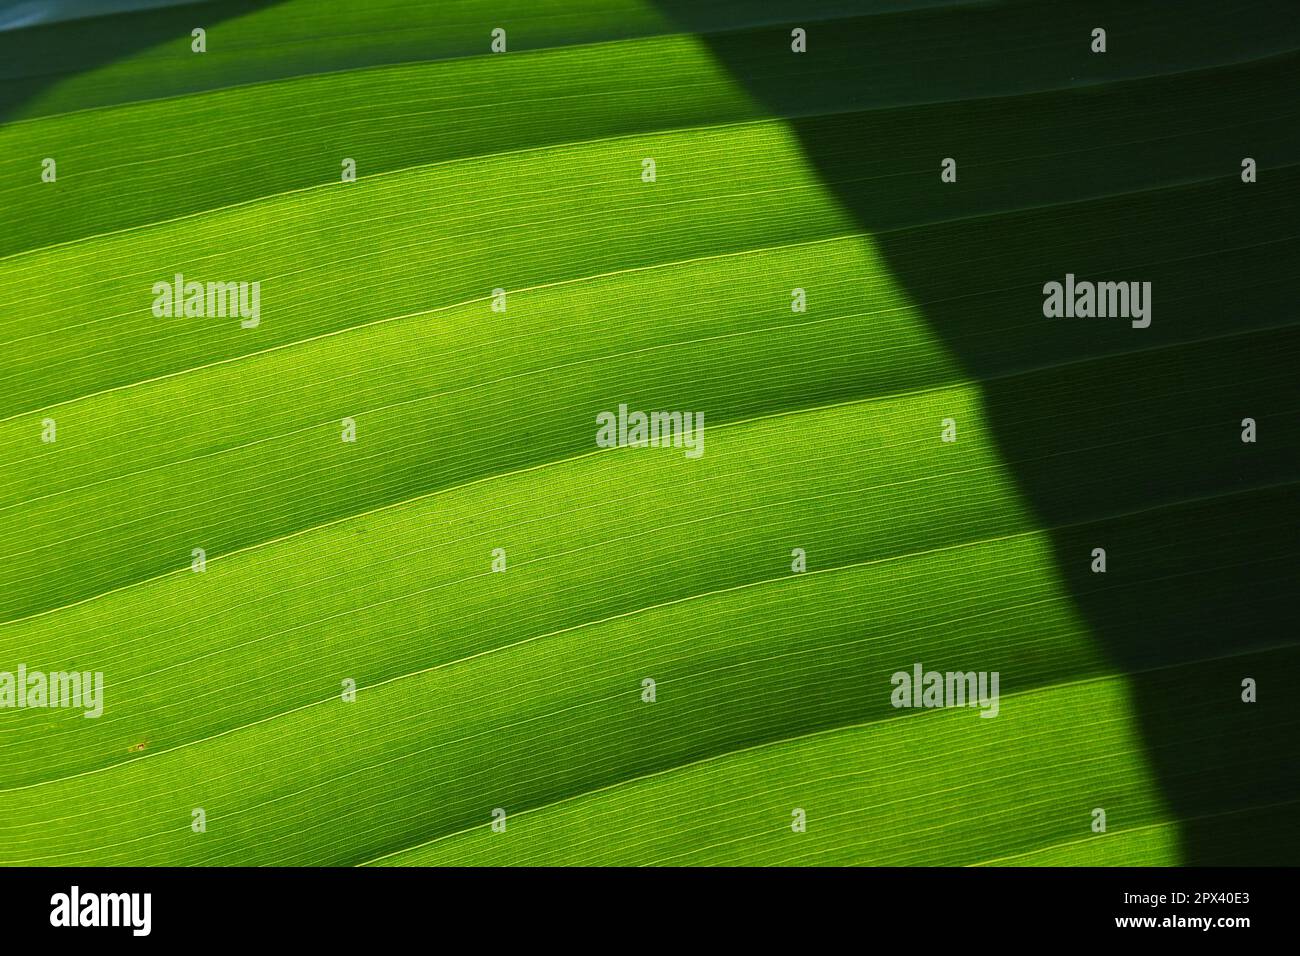 Banana leaf close up. Green leaf with a striped surface. Black shadow. Natural background. Banana, the oldest food crops. For tropical countries the m Stock Photo